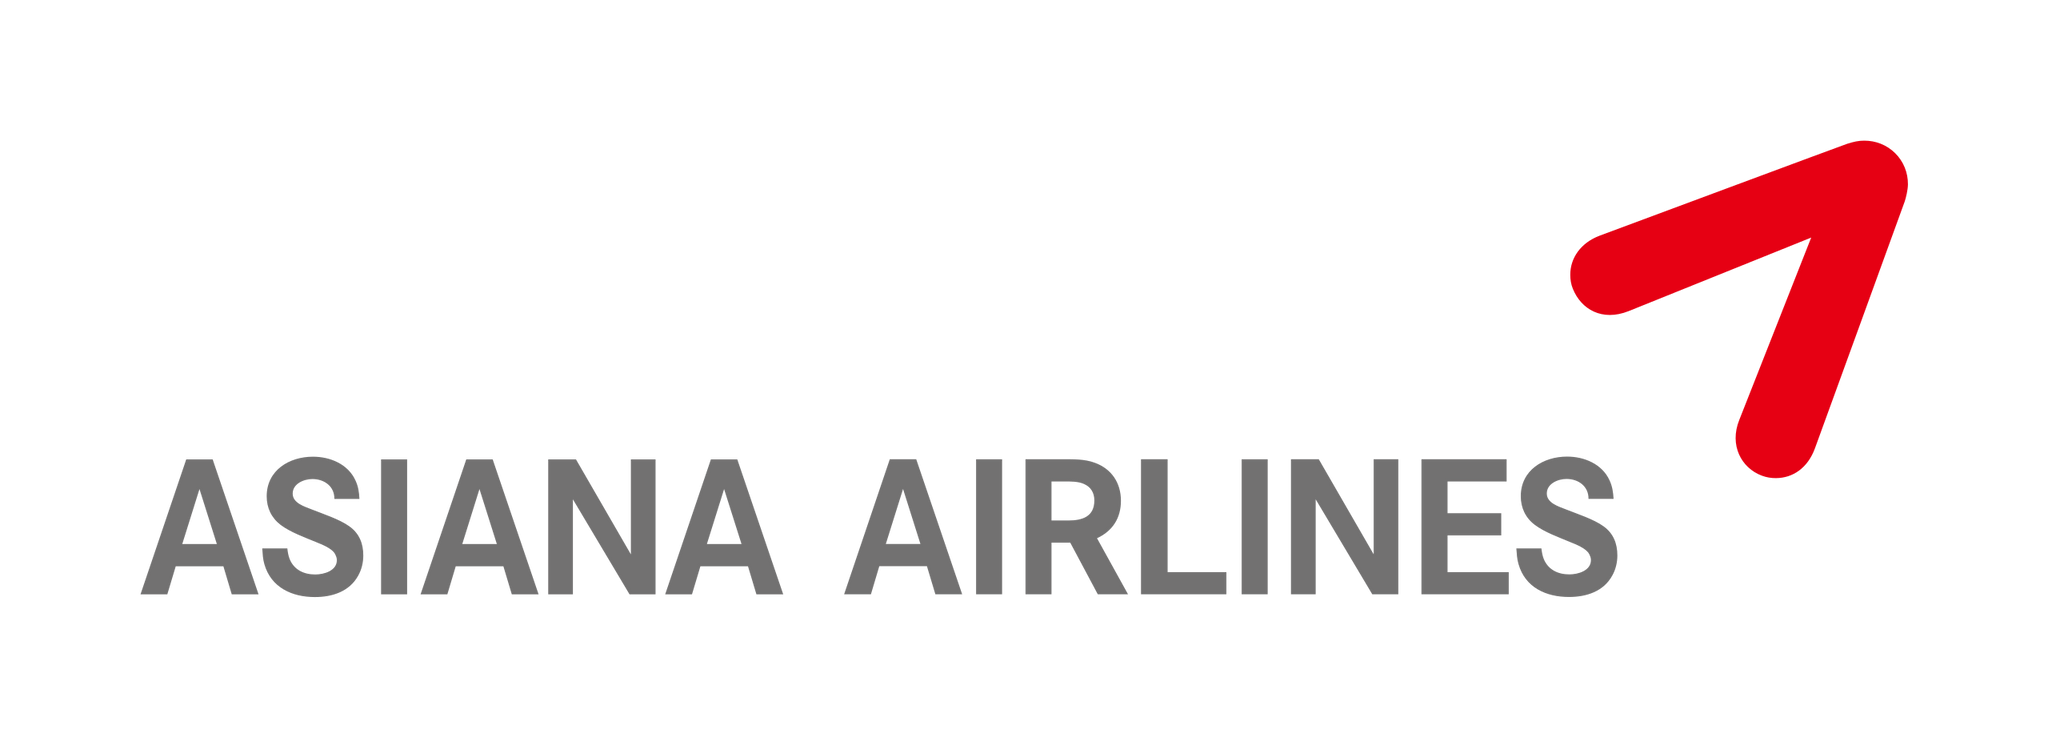 :asiana_airlines: